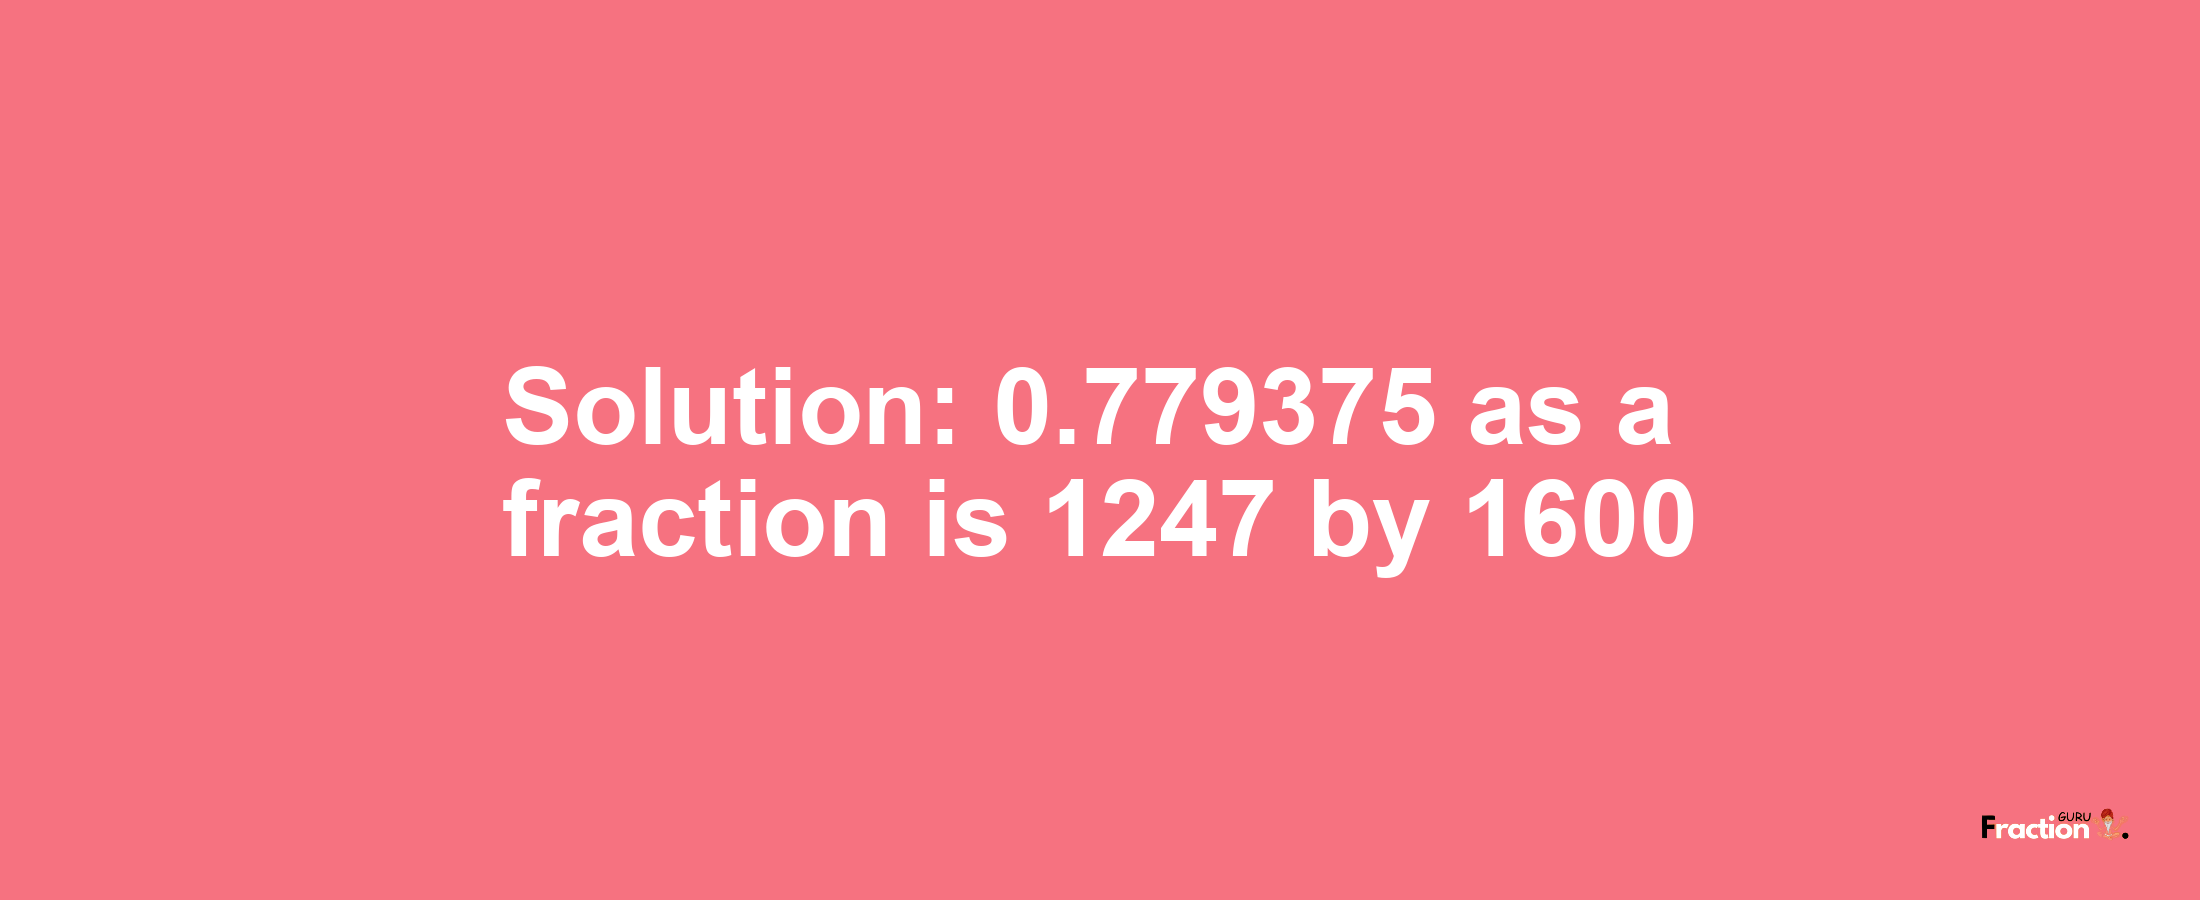 Solution:0.779375 as a fraction is 1247/1600